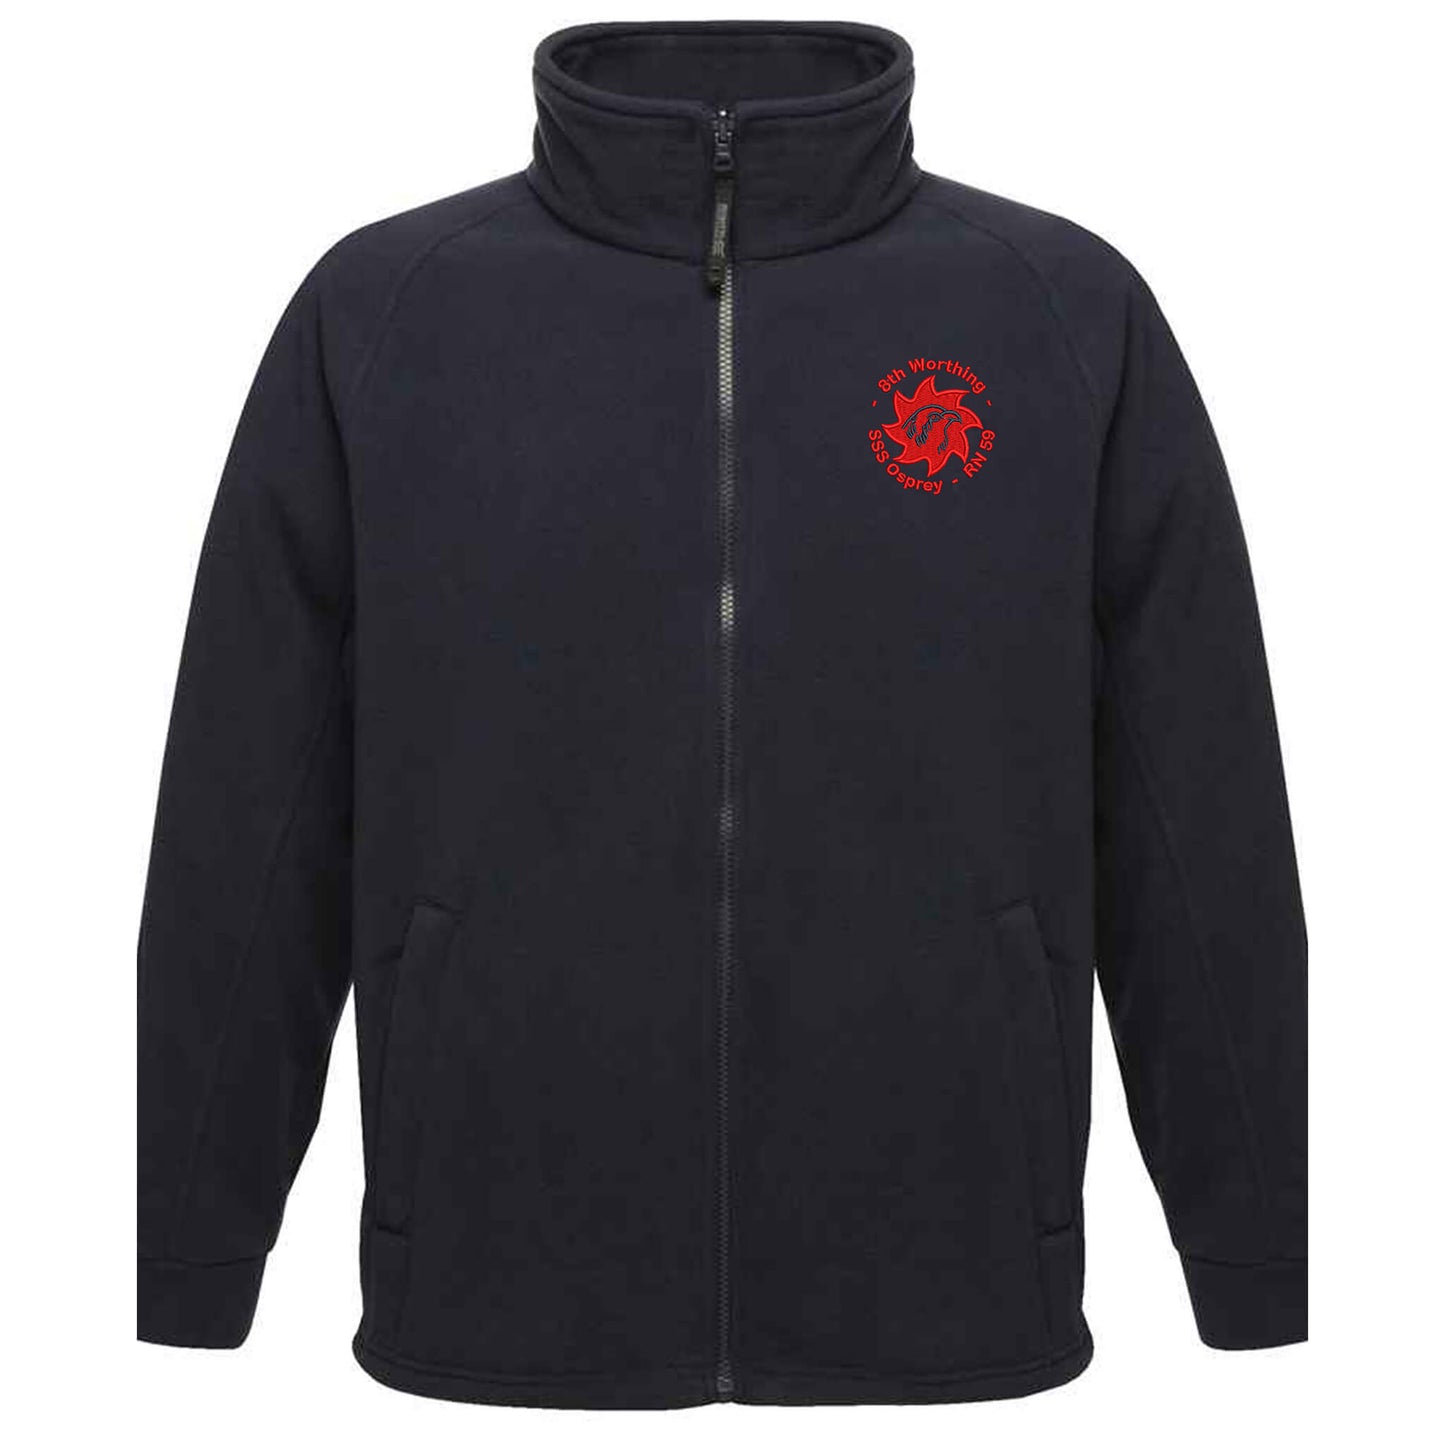 8th WORTHING SEA SCOUTS ADULTS EMBROIDERED FLEECE JACKET - Flamingo Rock®